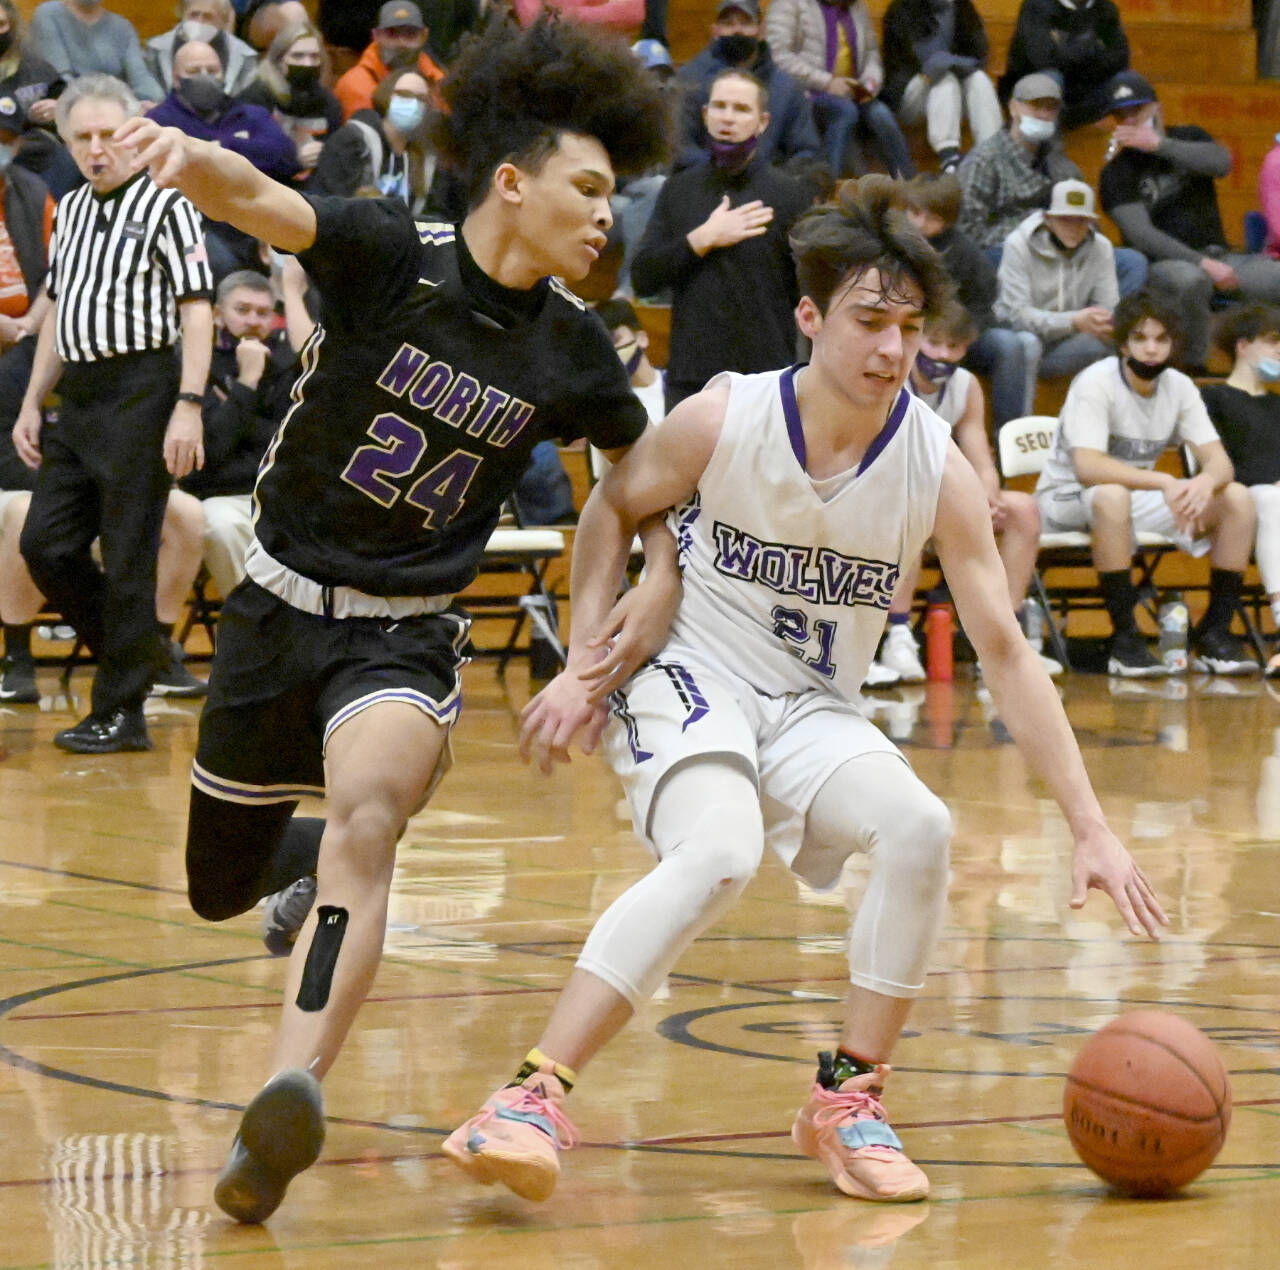 Sequim’s Jaydin Possin (21) dribbles against the defense of North Kitsap’s Jalen East on Thursday in Sequim. (Michael Dashiell/Olympic Peninsula News Group)